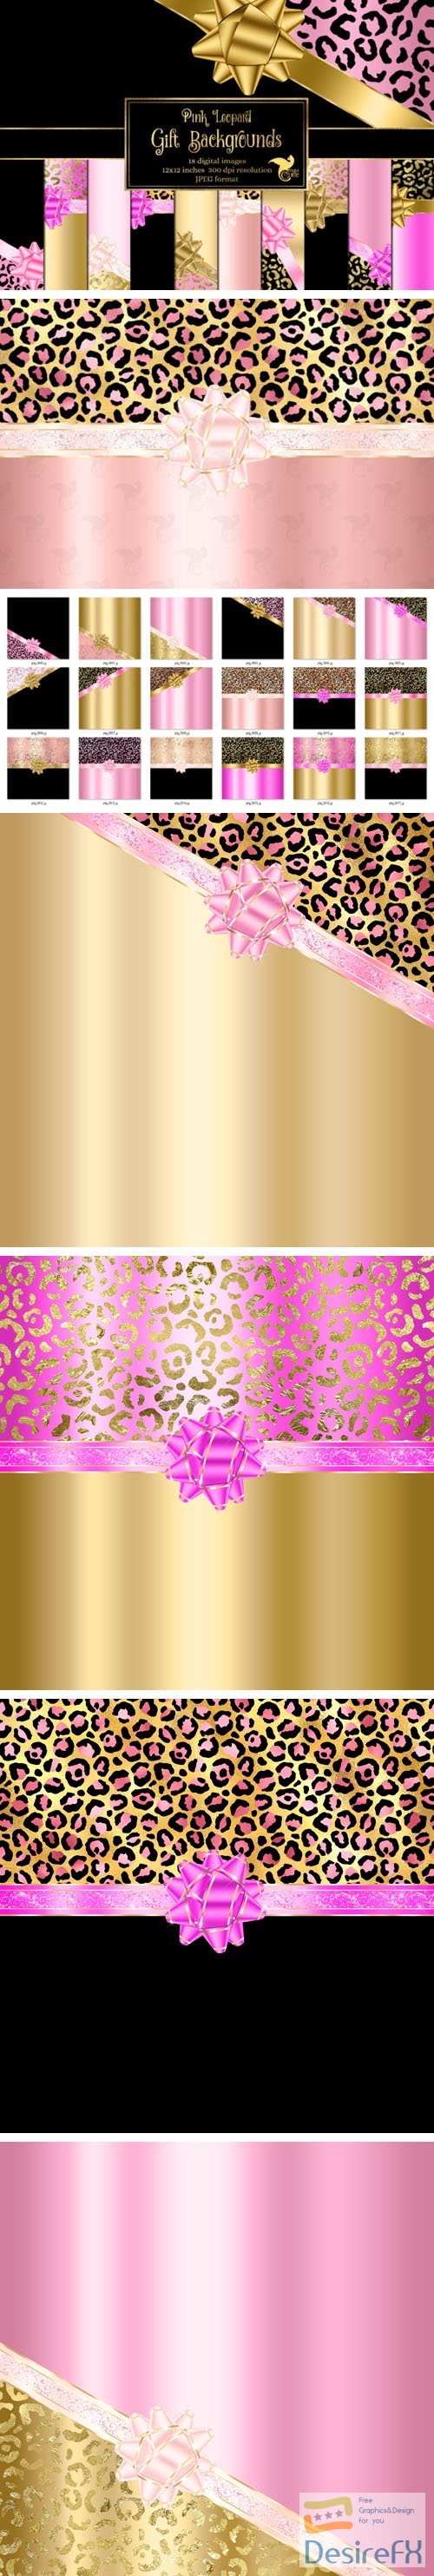 Luxury Pink and Gold Gift Backgrounds